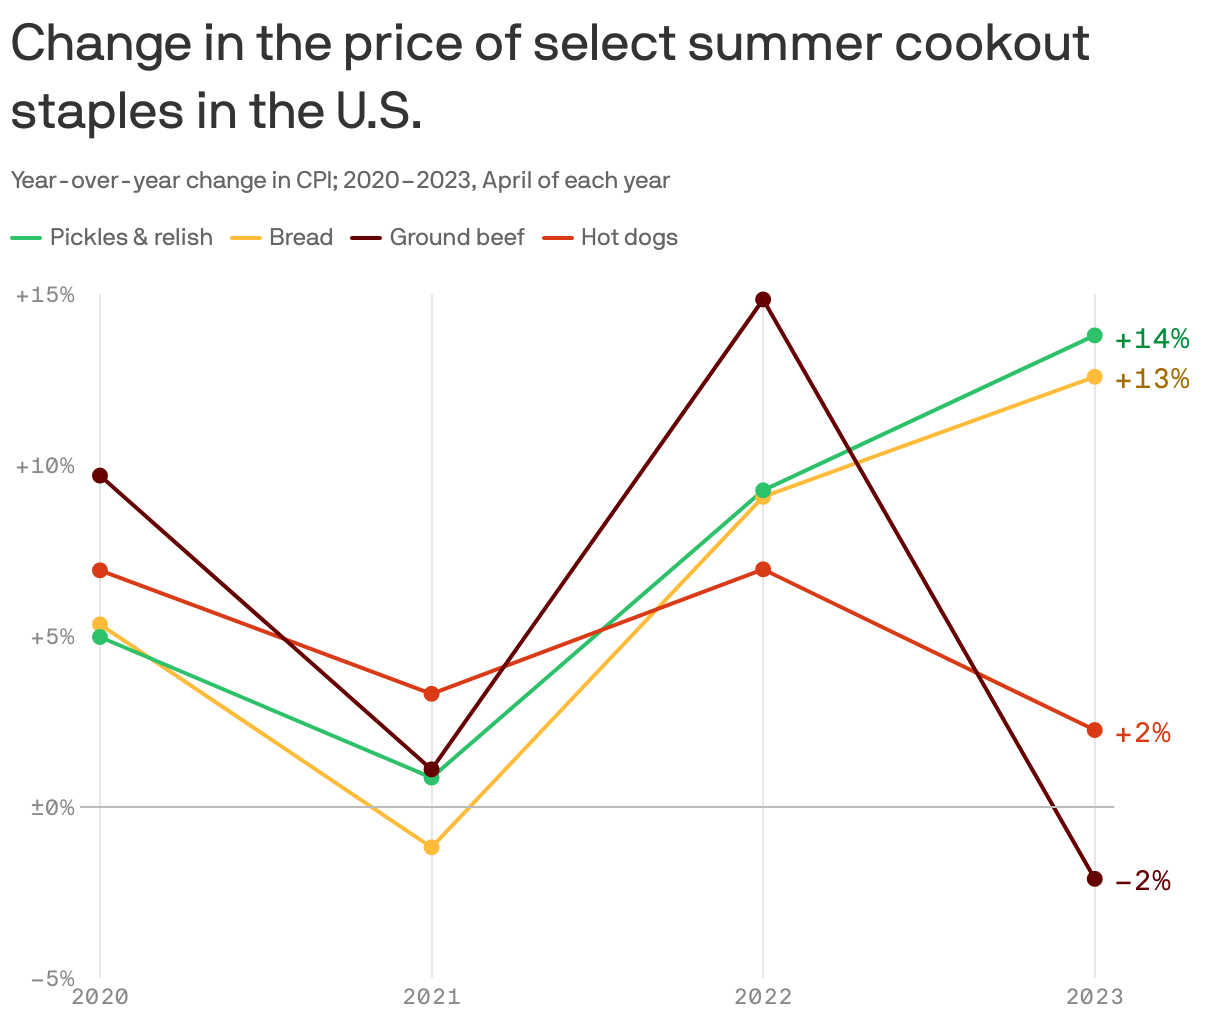 Change in the price of select summer cookout staples in the U.S.